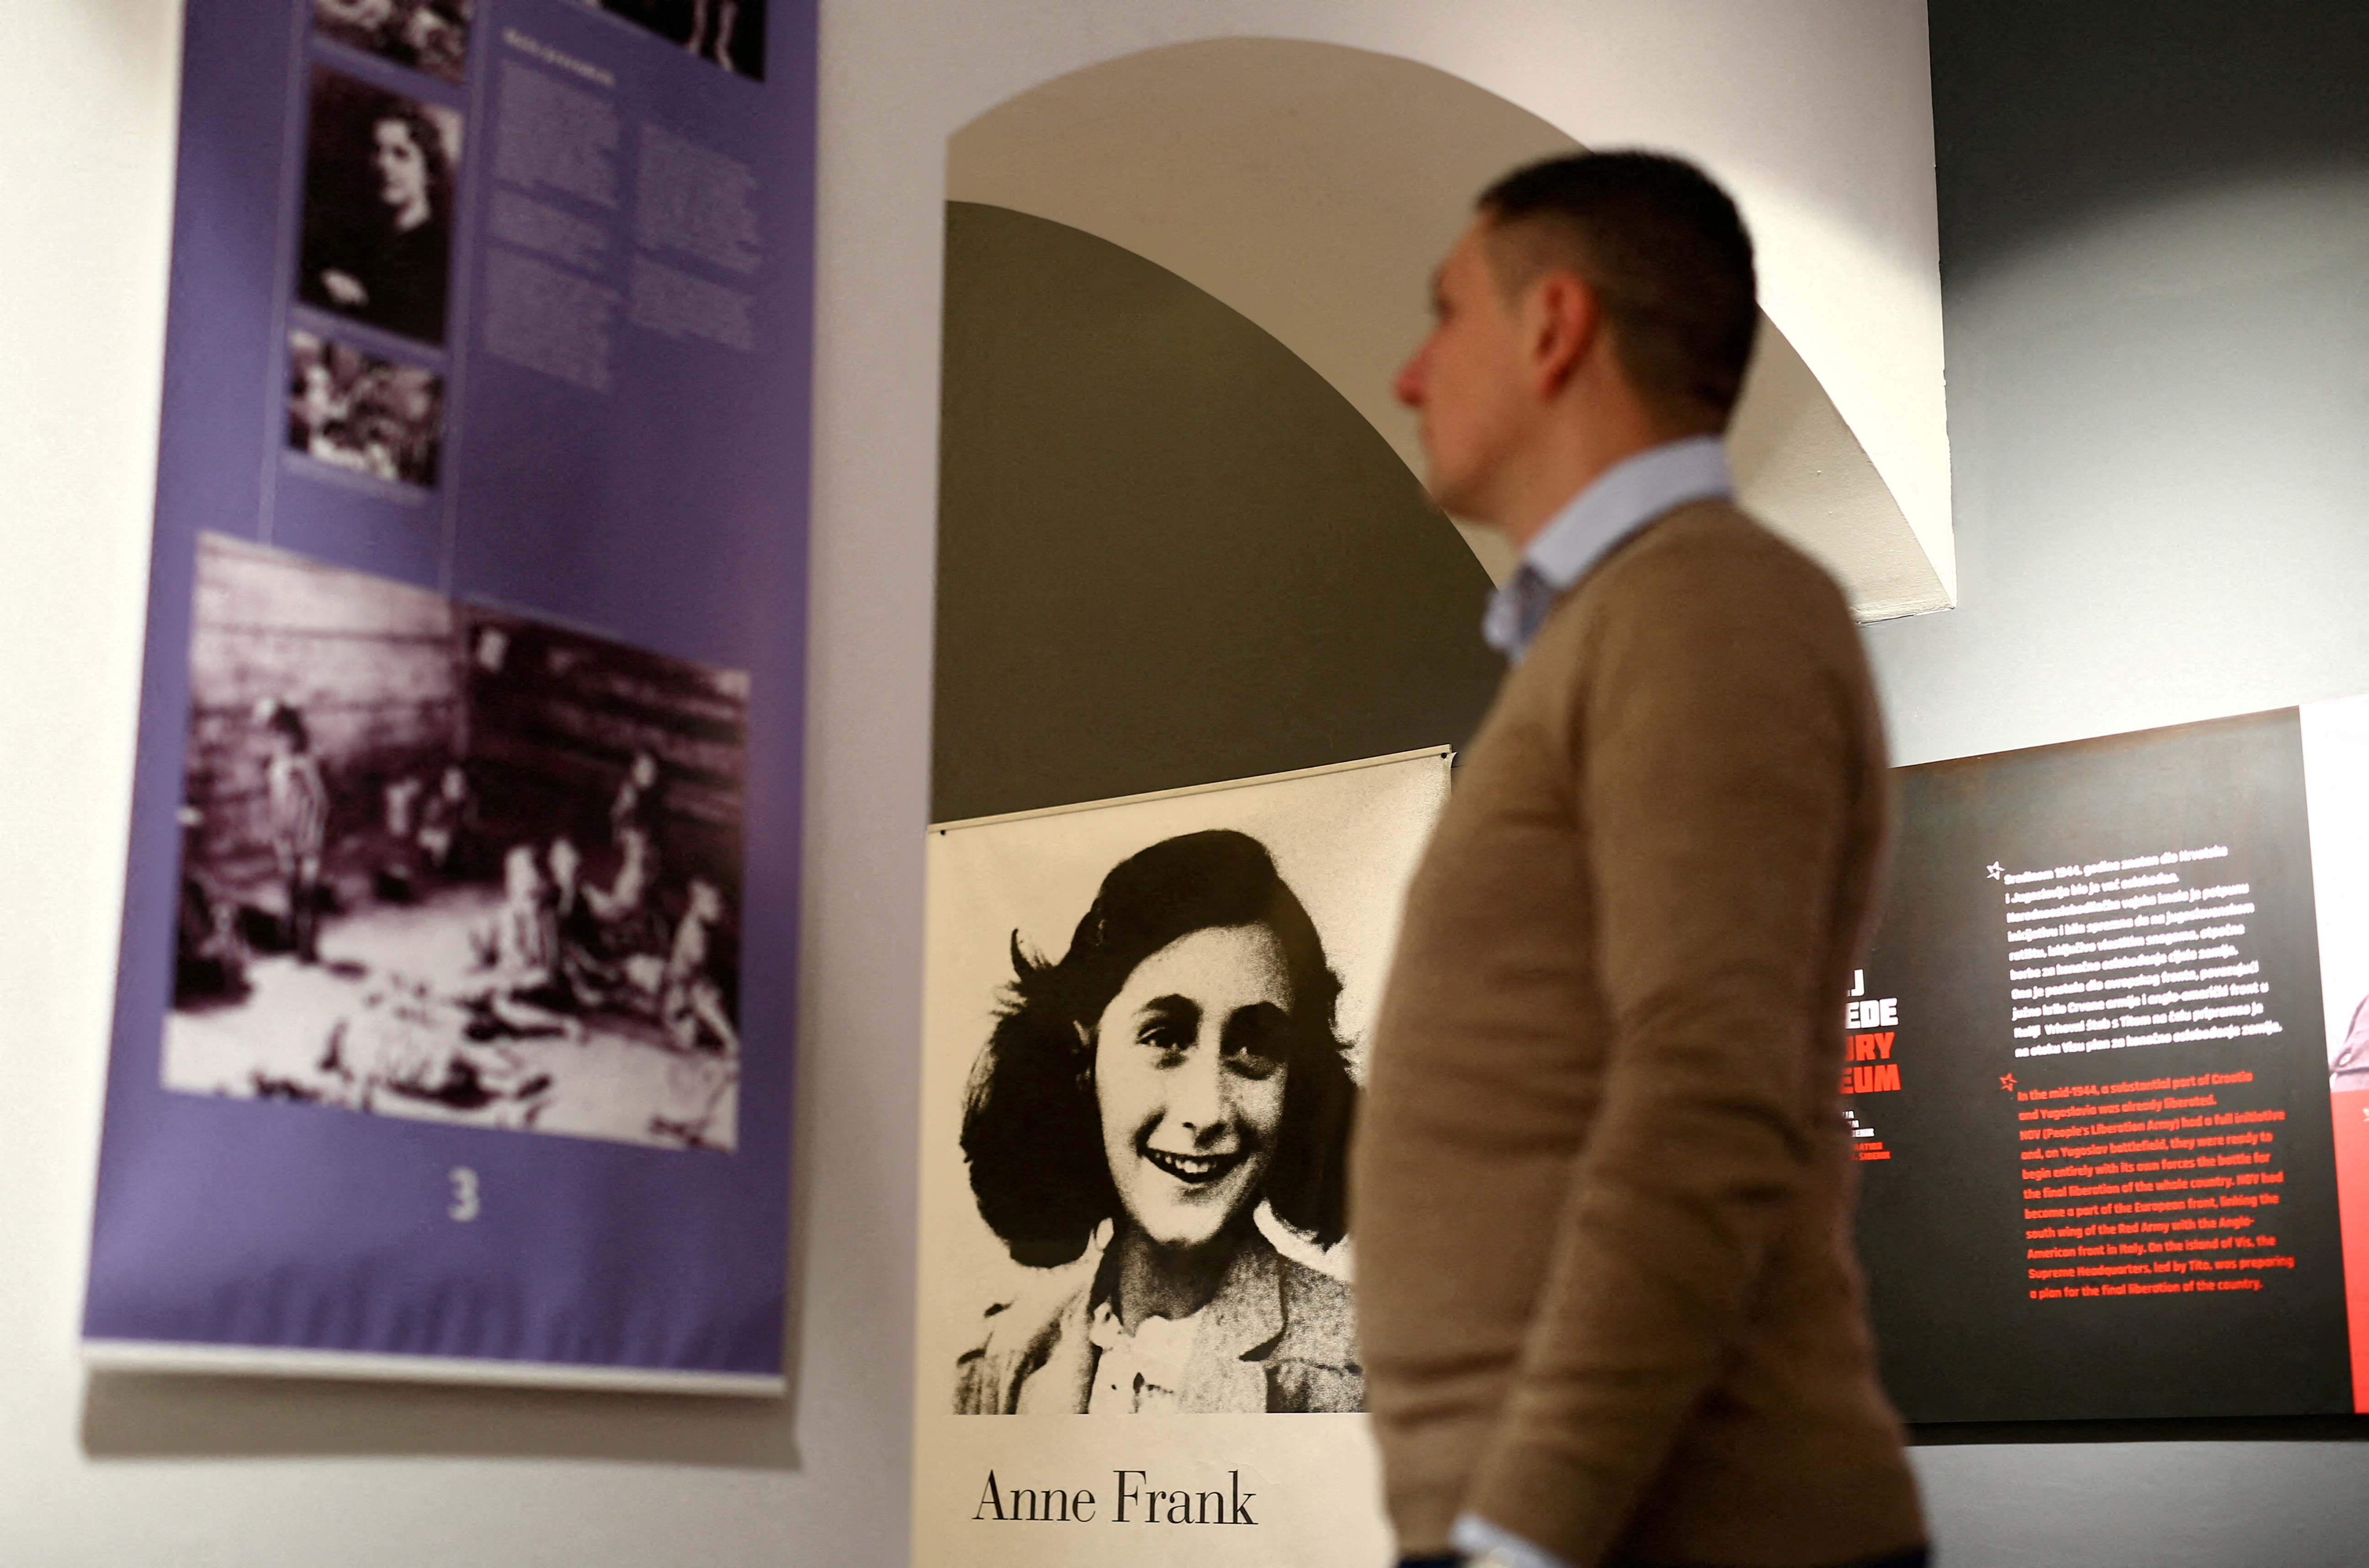 A man looks at an exhibition about Anne Frank at the Victory museum in Sibenik, Croatia